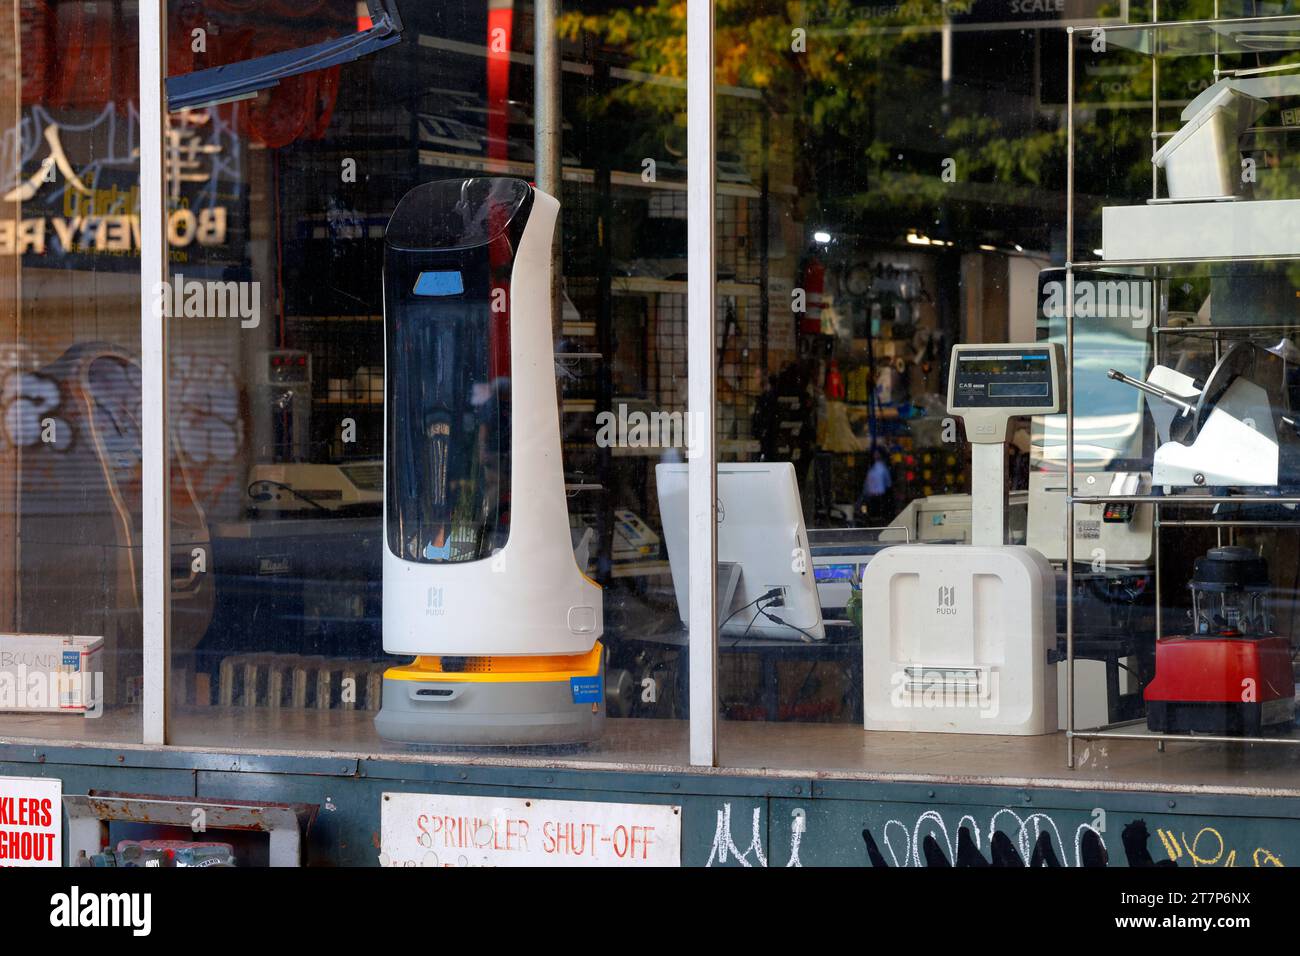 A Pudu Robotics Kettybot automated smart delivery robot, retail service robot, in the window of a Bowery restaurant supply store in New York City. Stock Photo